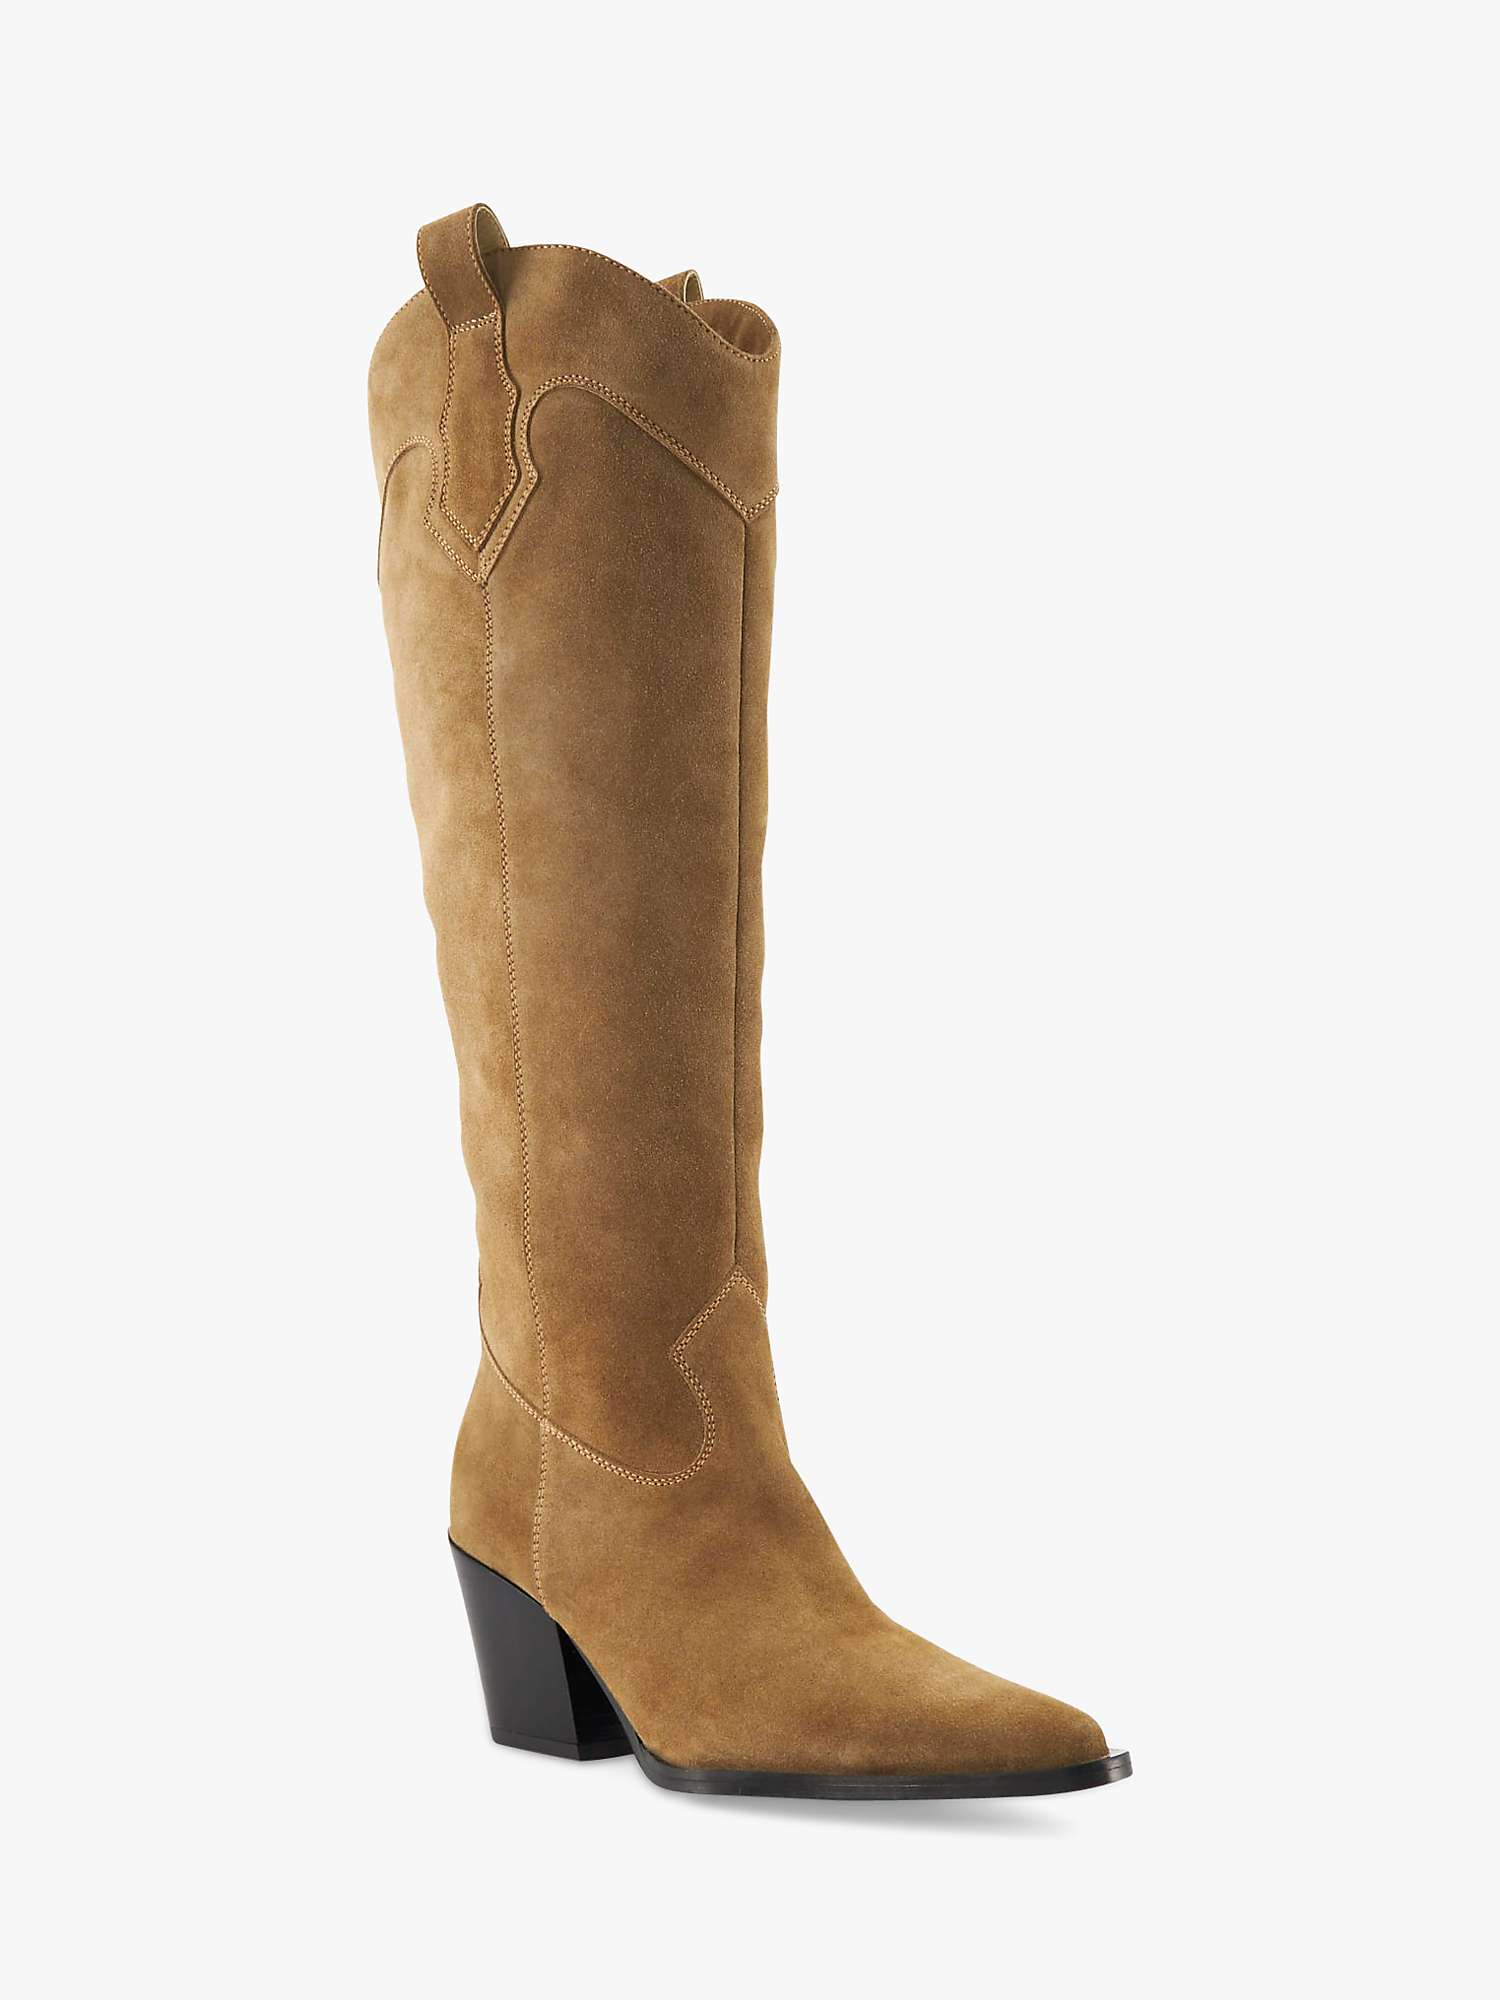 Buy Dune Tennessee Suede Western Knee Boots, Taupe Online at johnlewis.com